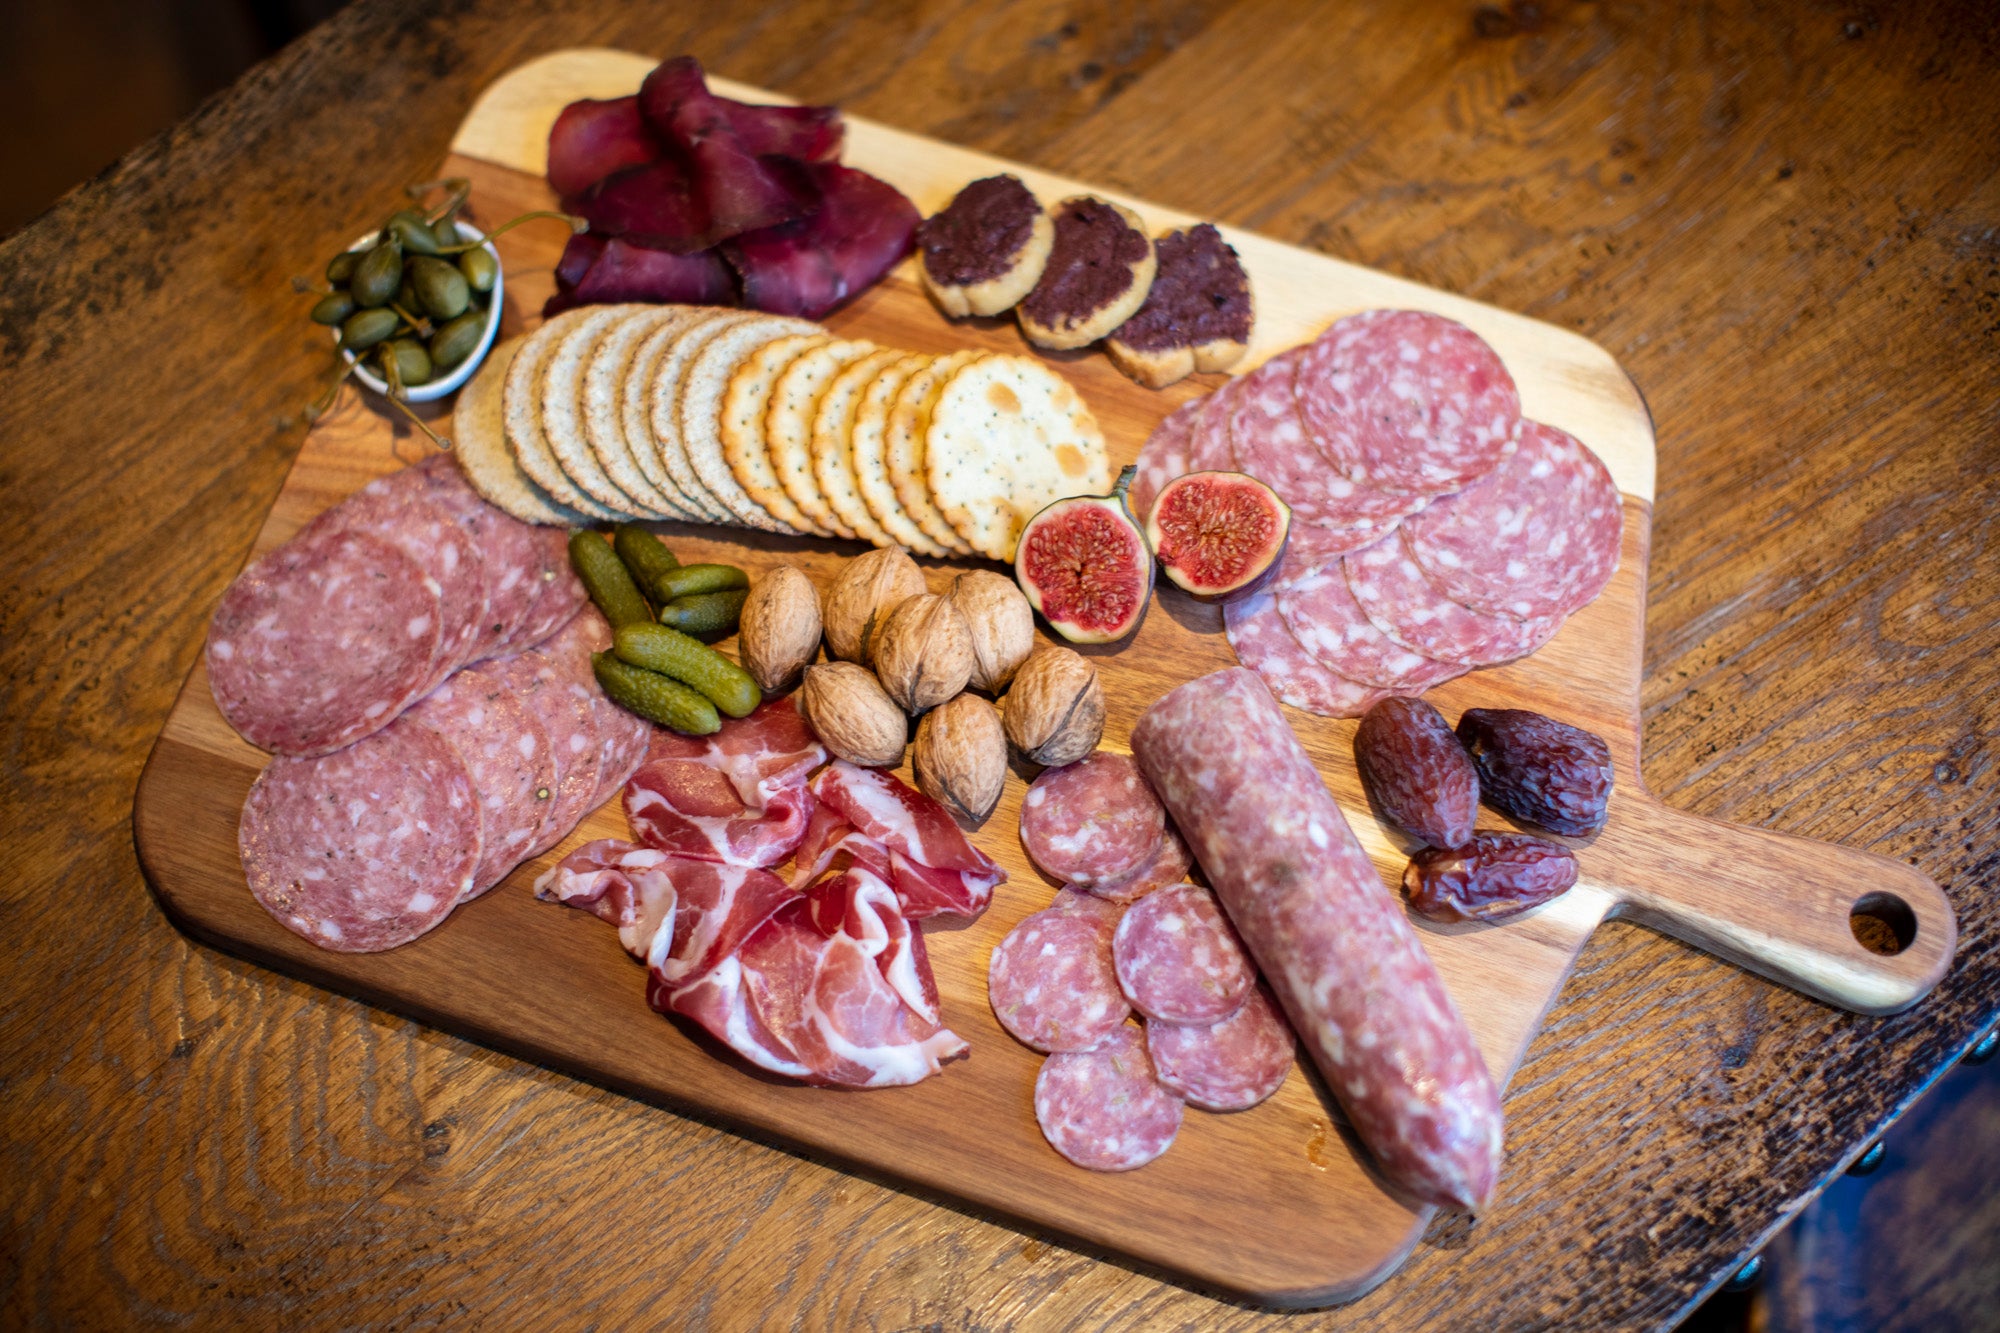 Marsh Pig Charcuterie Selection Pack [Sliced] - 100g